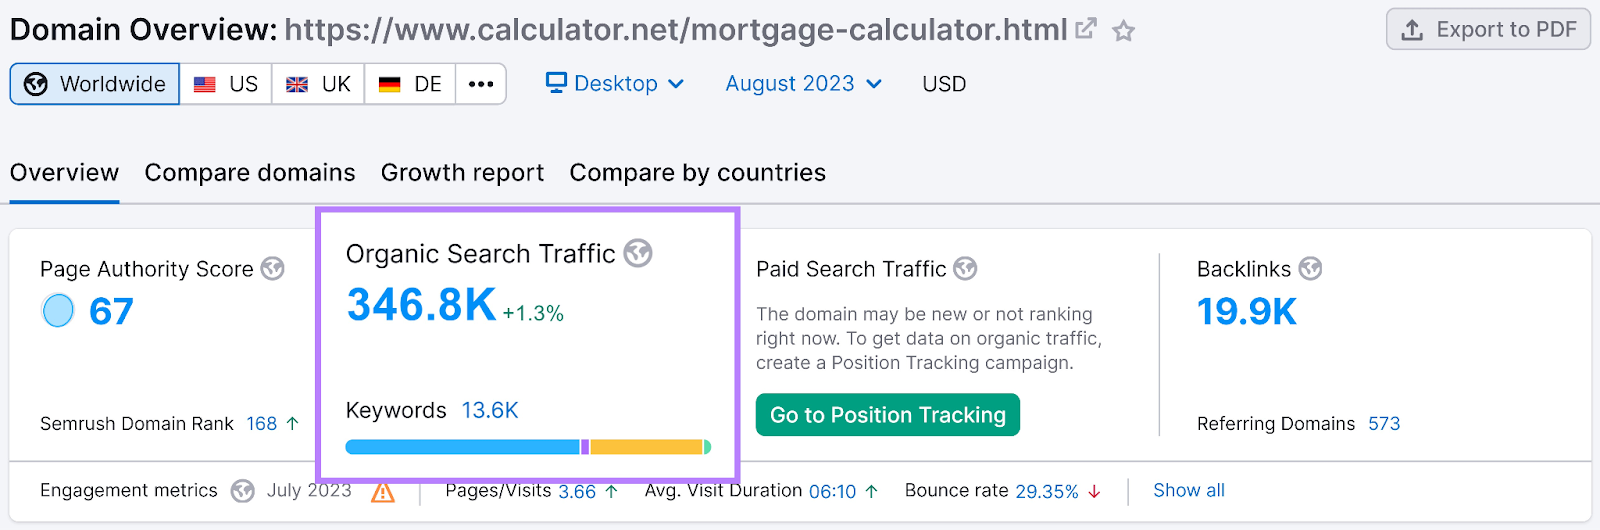 Calculator.net gets around 350K monthly visitors according to data in Domain Overview tool